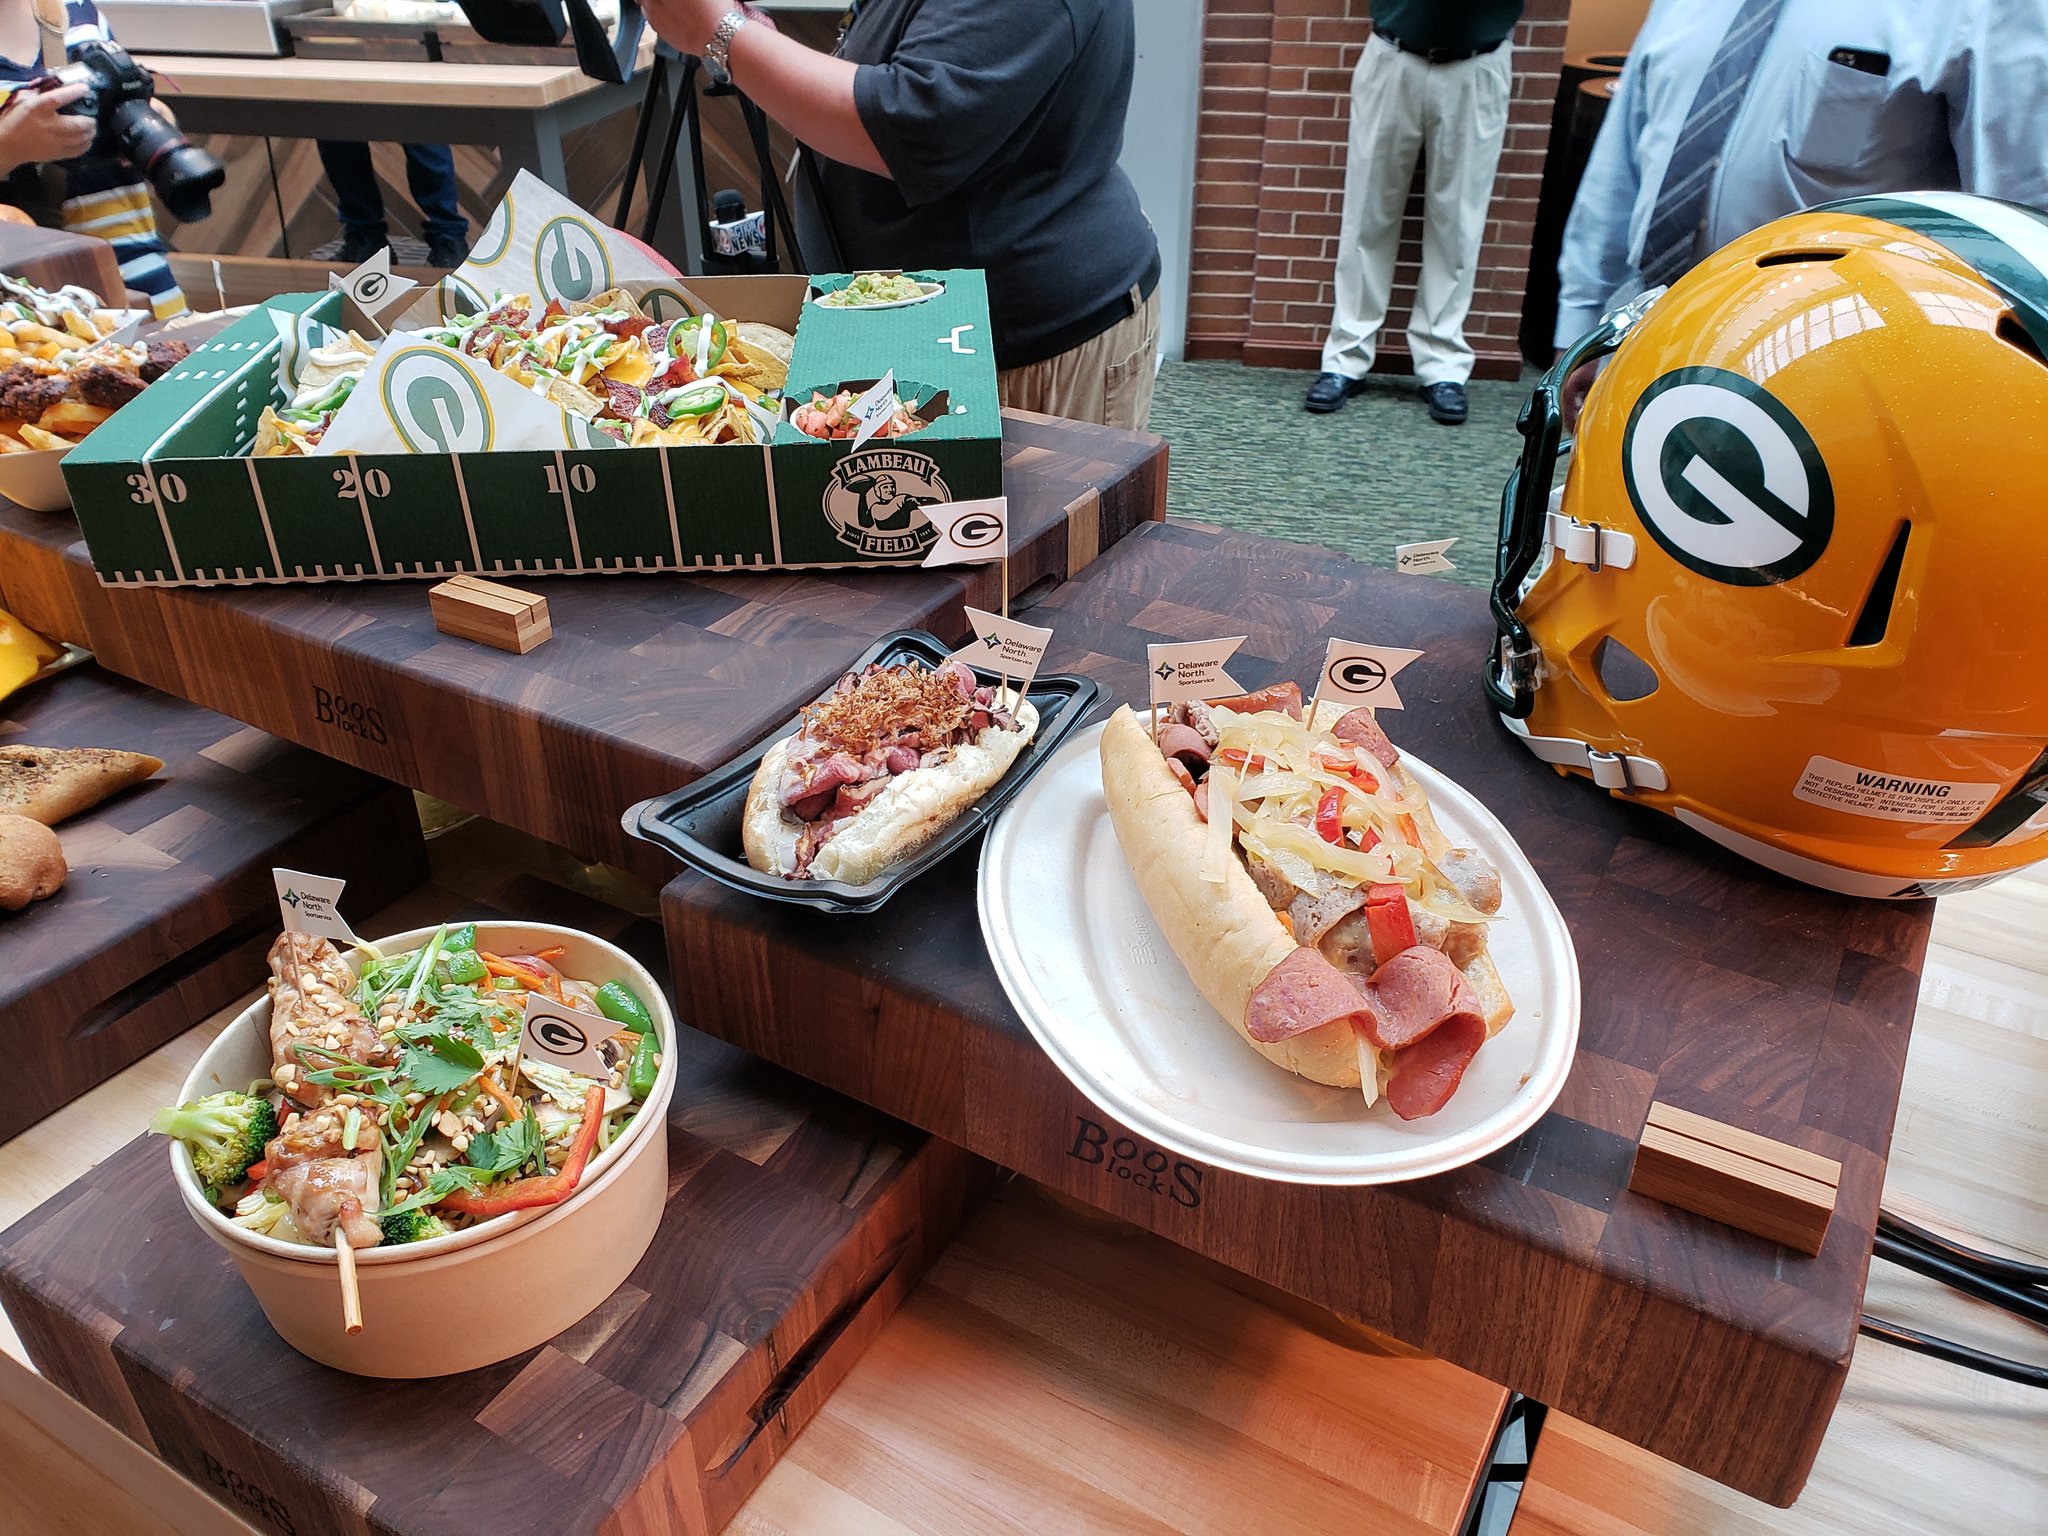 Lambeau Field's new concession items: NFL fans can expect to pay more